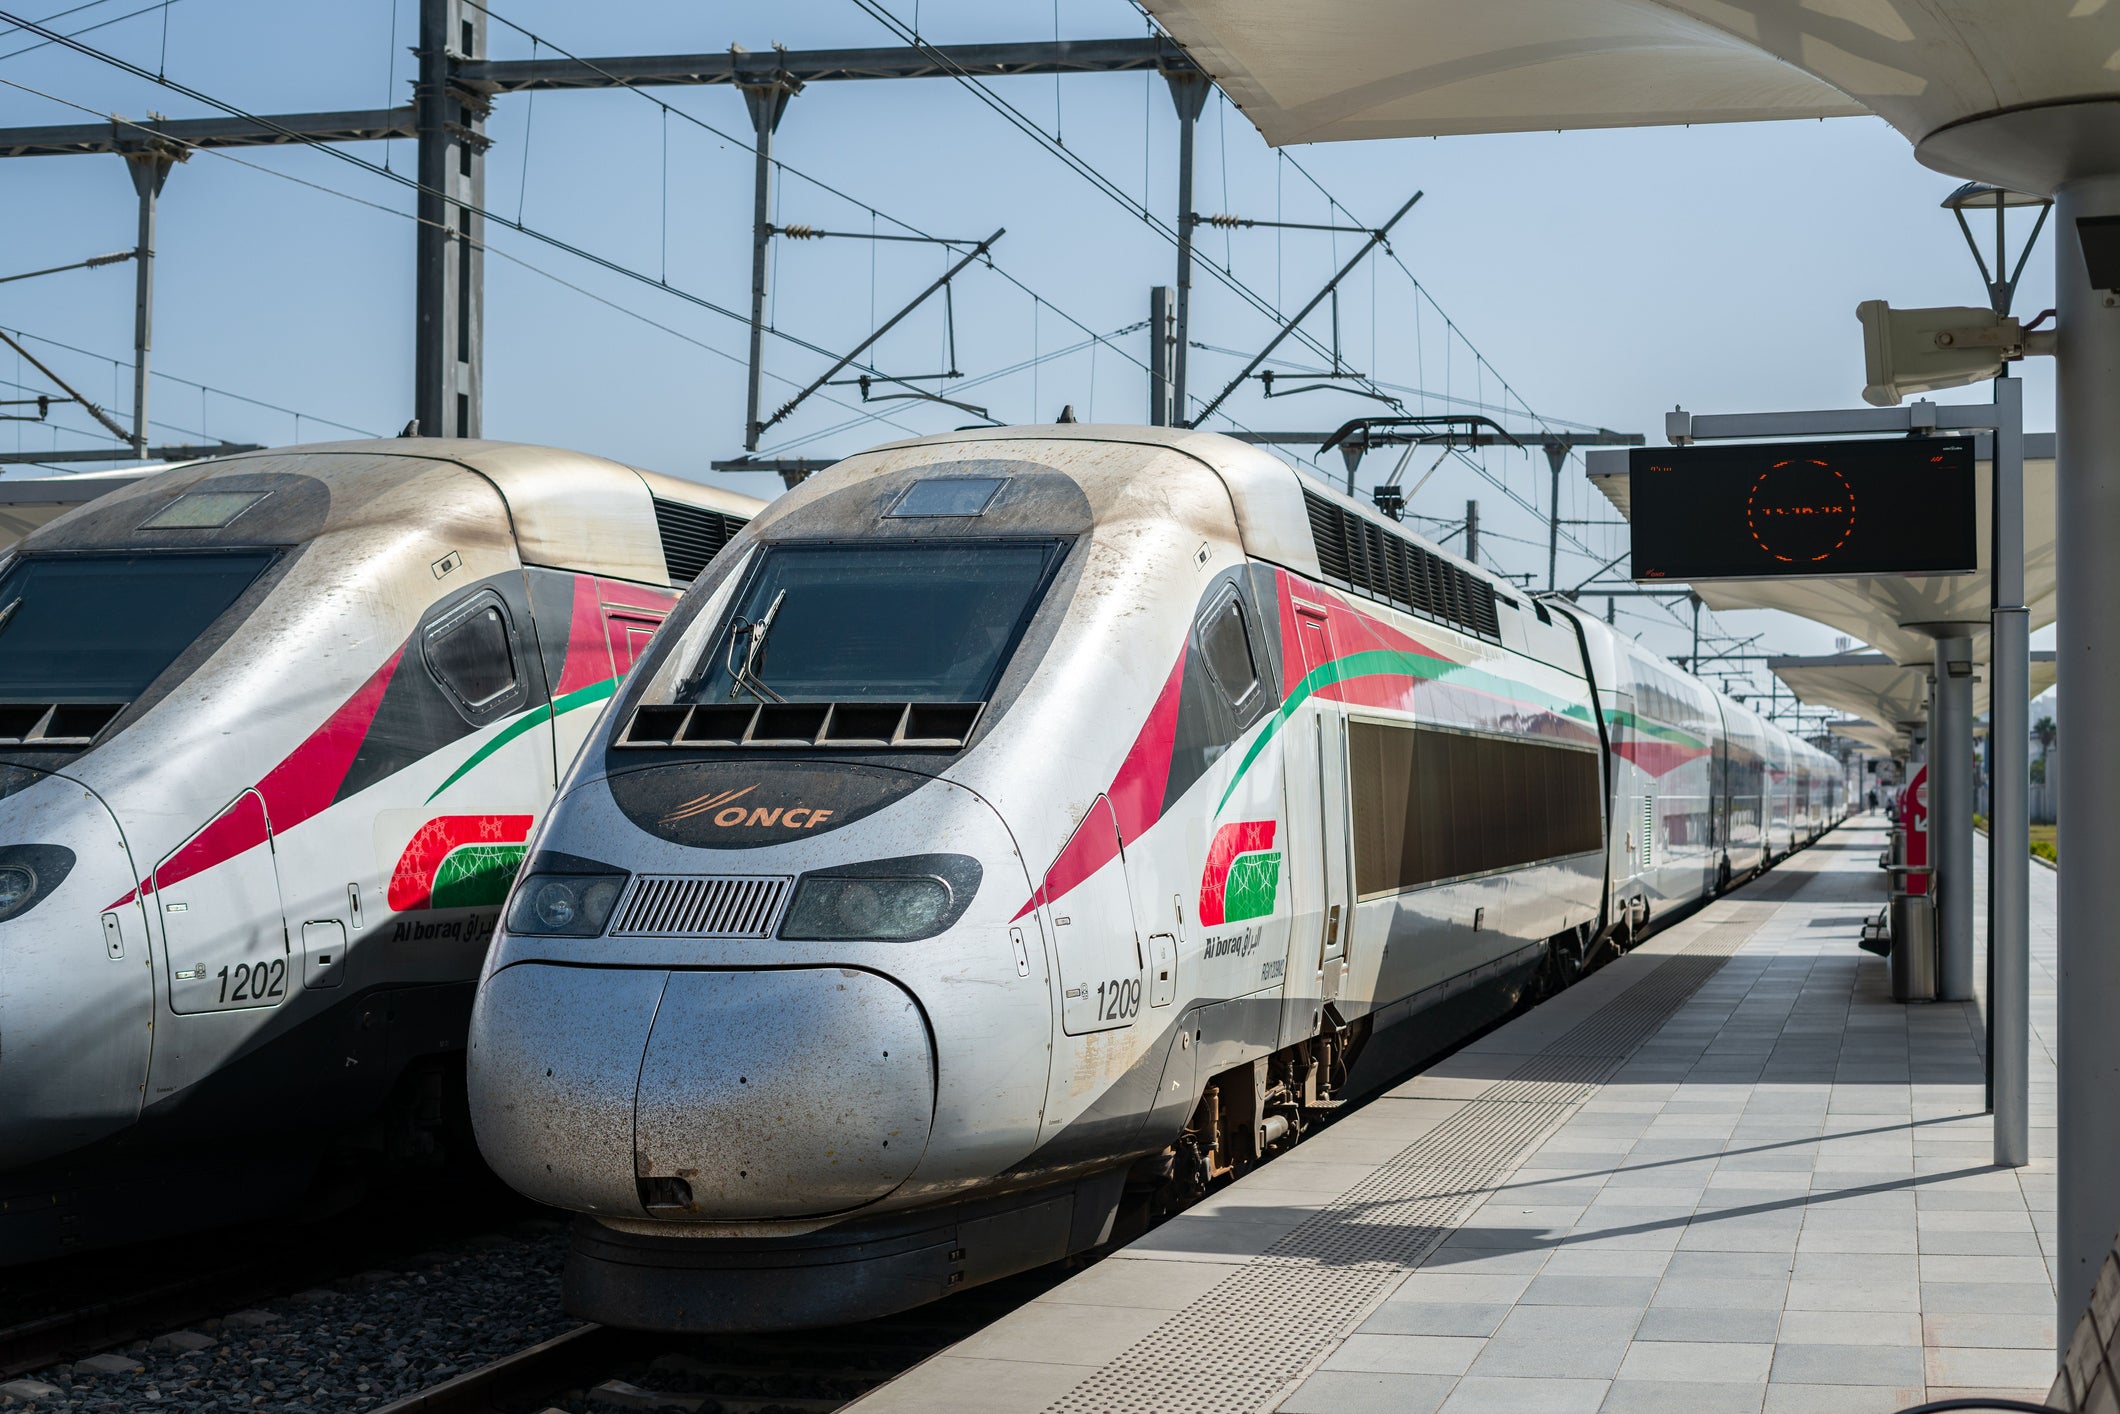 Morocco’s Al Boraq high-speed trains at Tangiers railway station. Services could one day run across the strait of Gibraltar